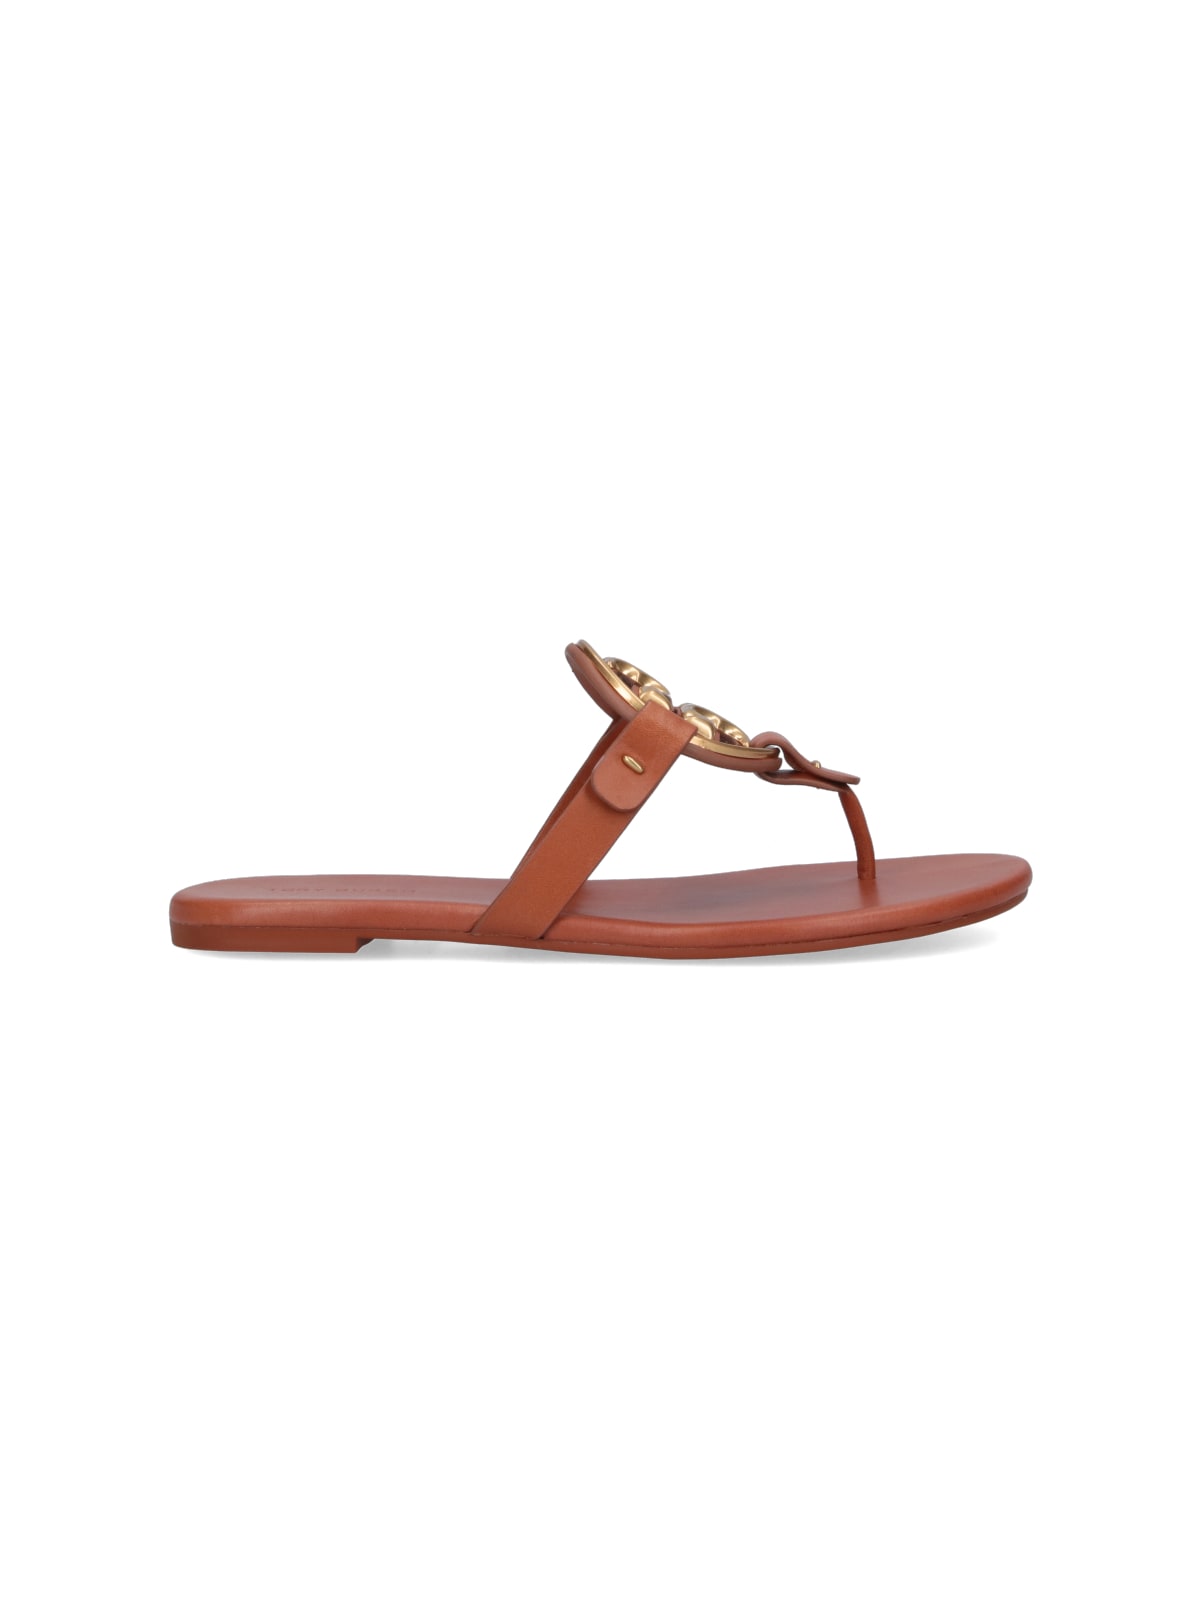 Tory Burch Miller Thong Sandals In Brown